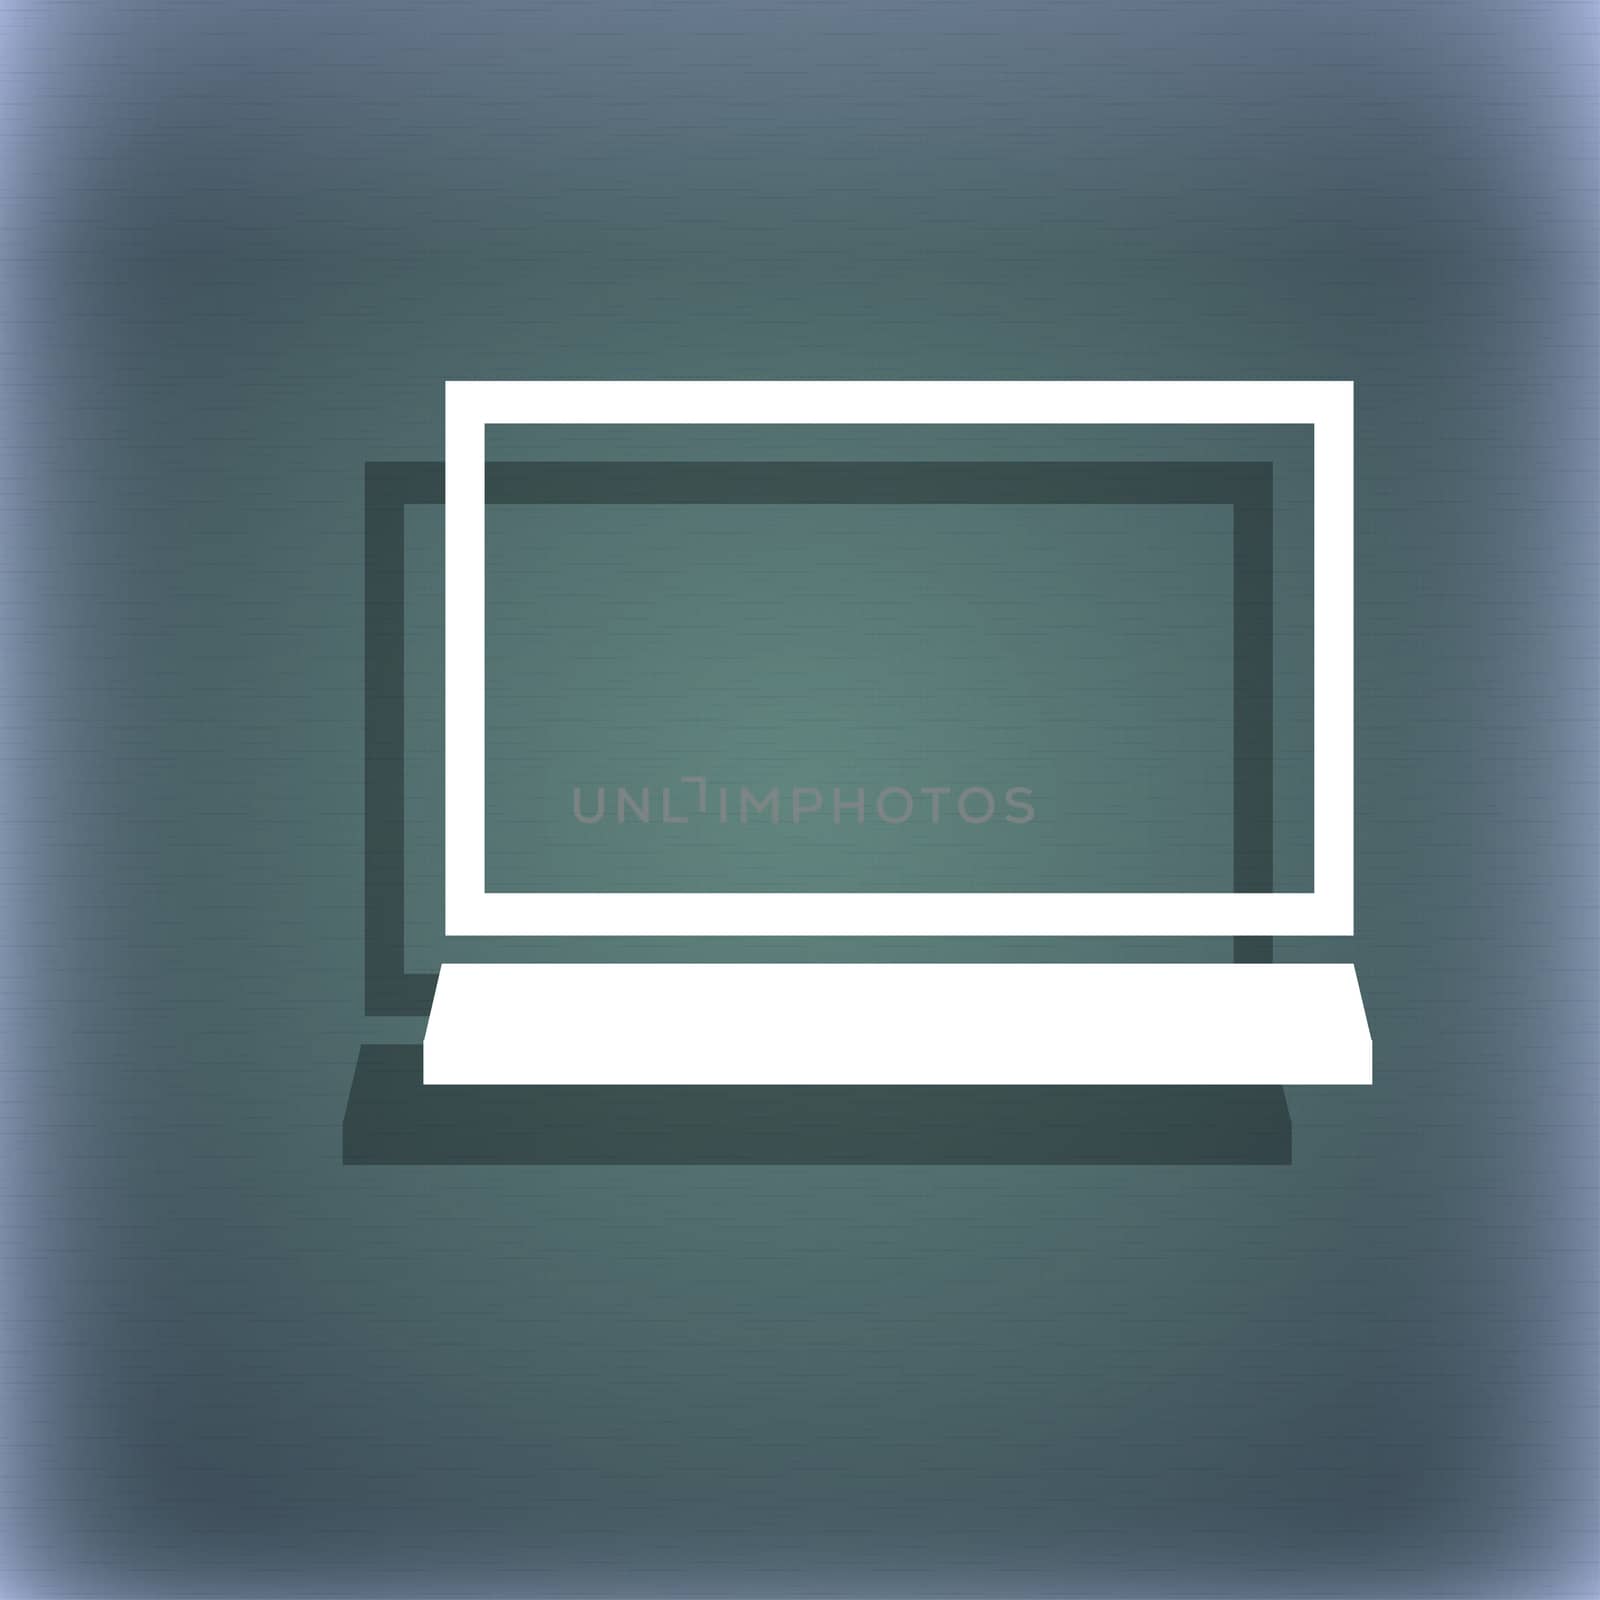 Computer widescreen monitor sign icon. On the blue-green abstract background with shadow and space for your text. illustration